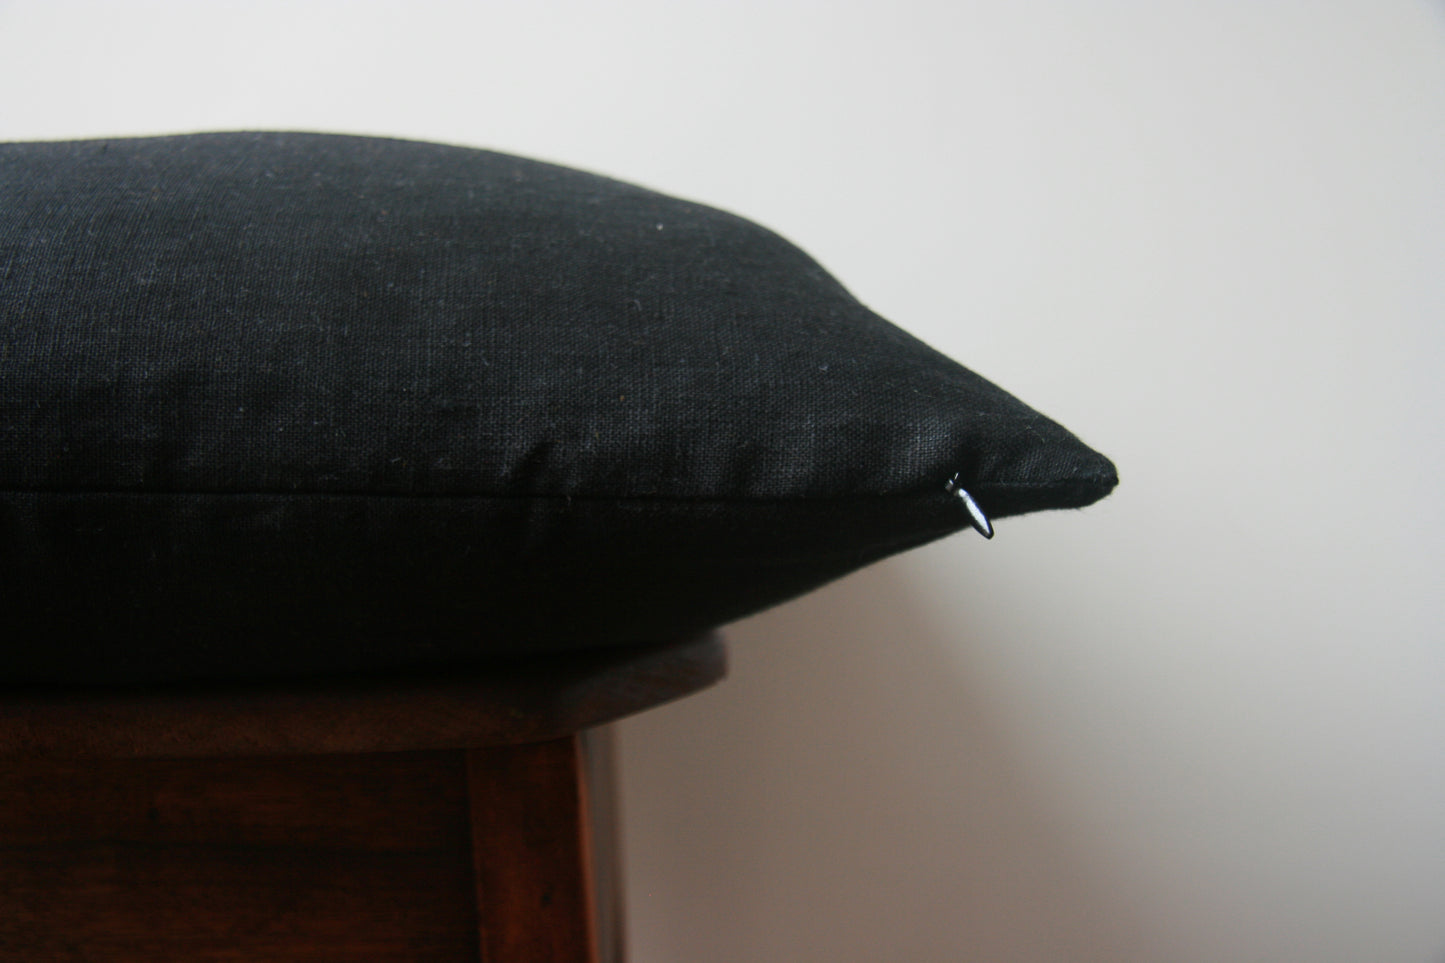 Side profile of cushion cover. Black on both sides. Concealed zip with black zipper pull just visible